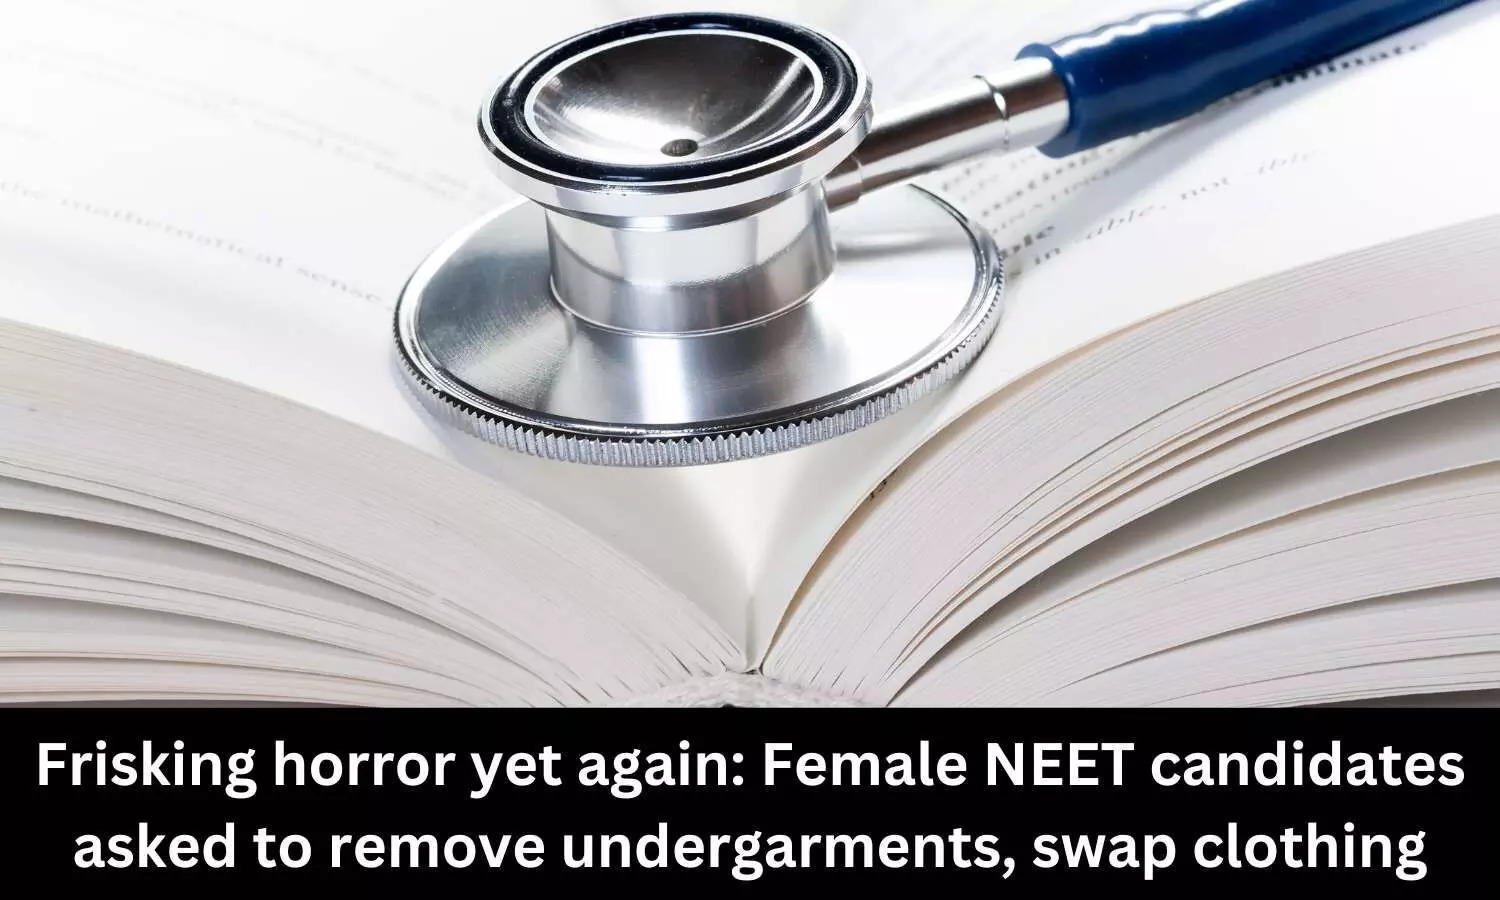 Female NEET candidates asked to remove undergarments, swap clothing